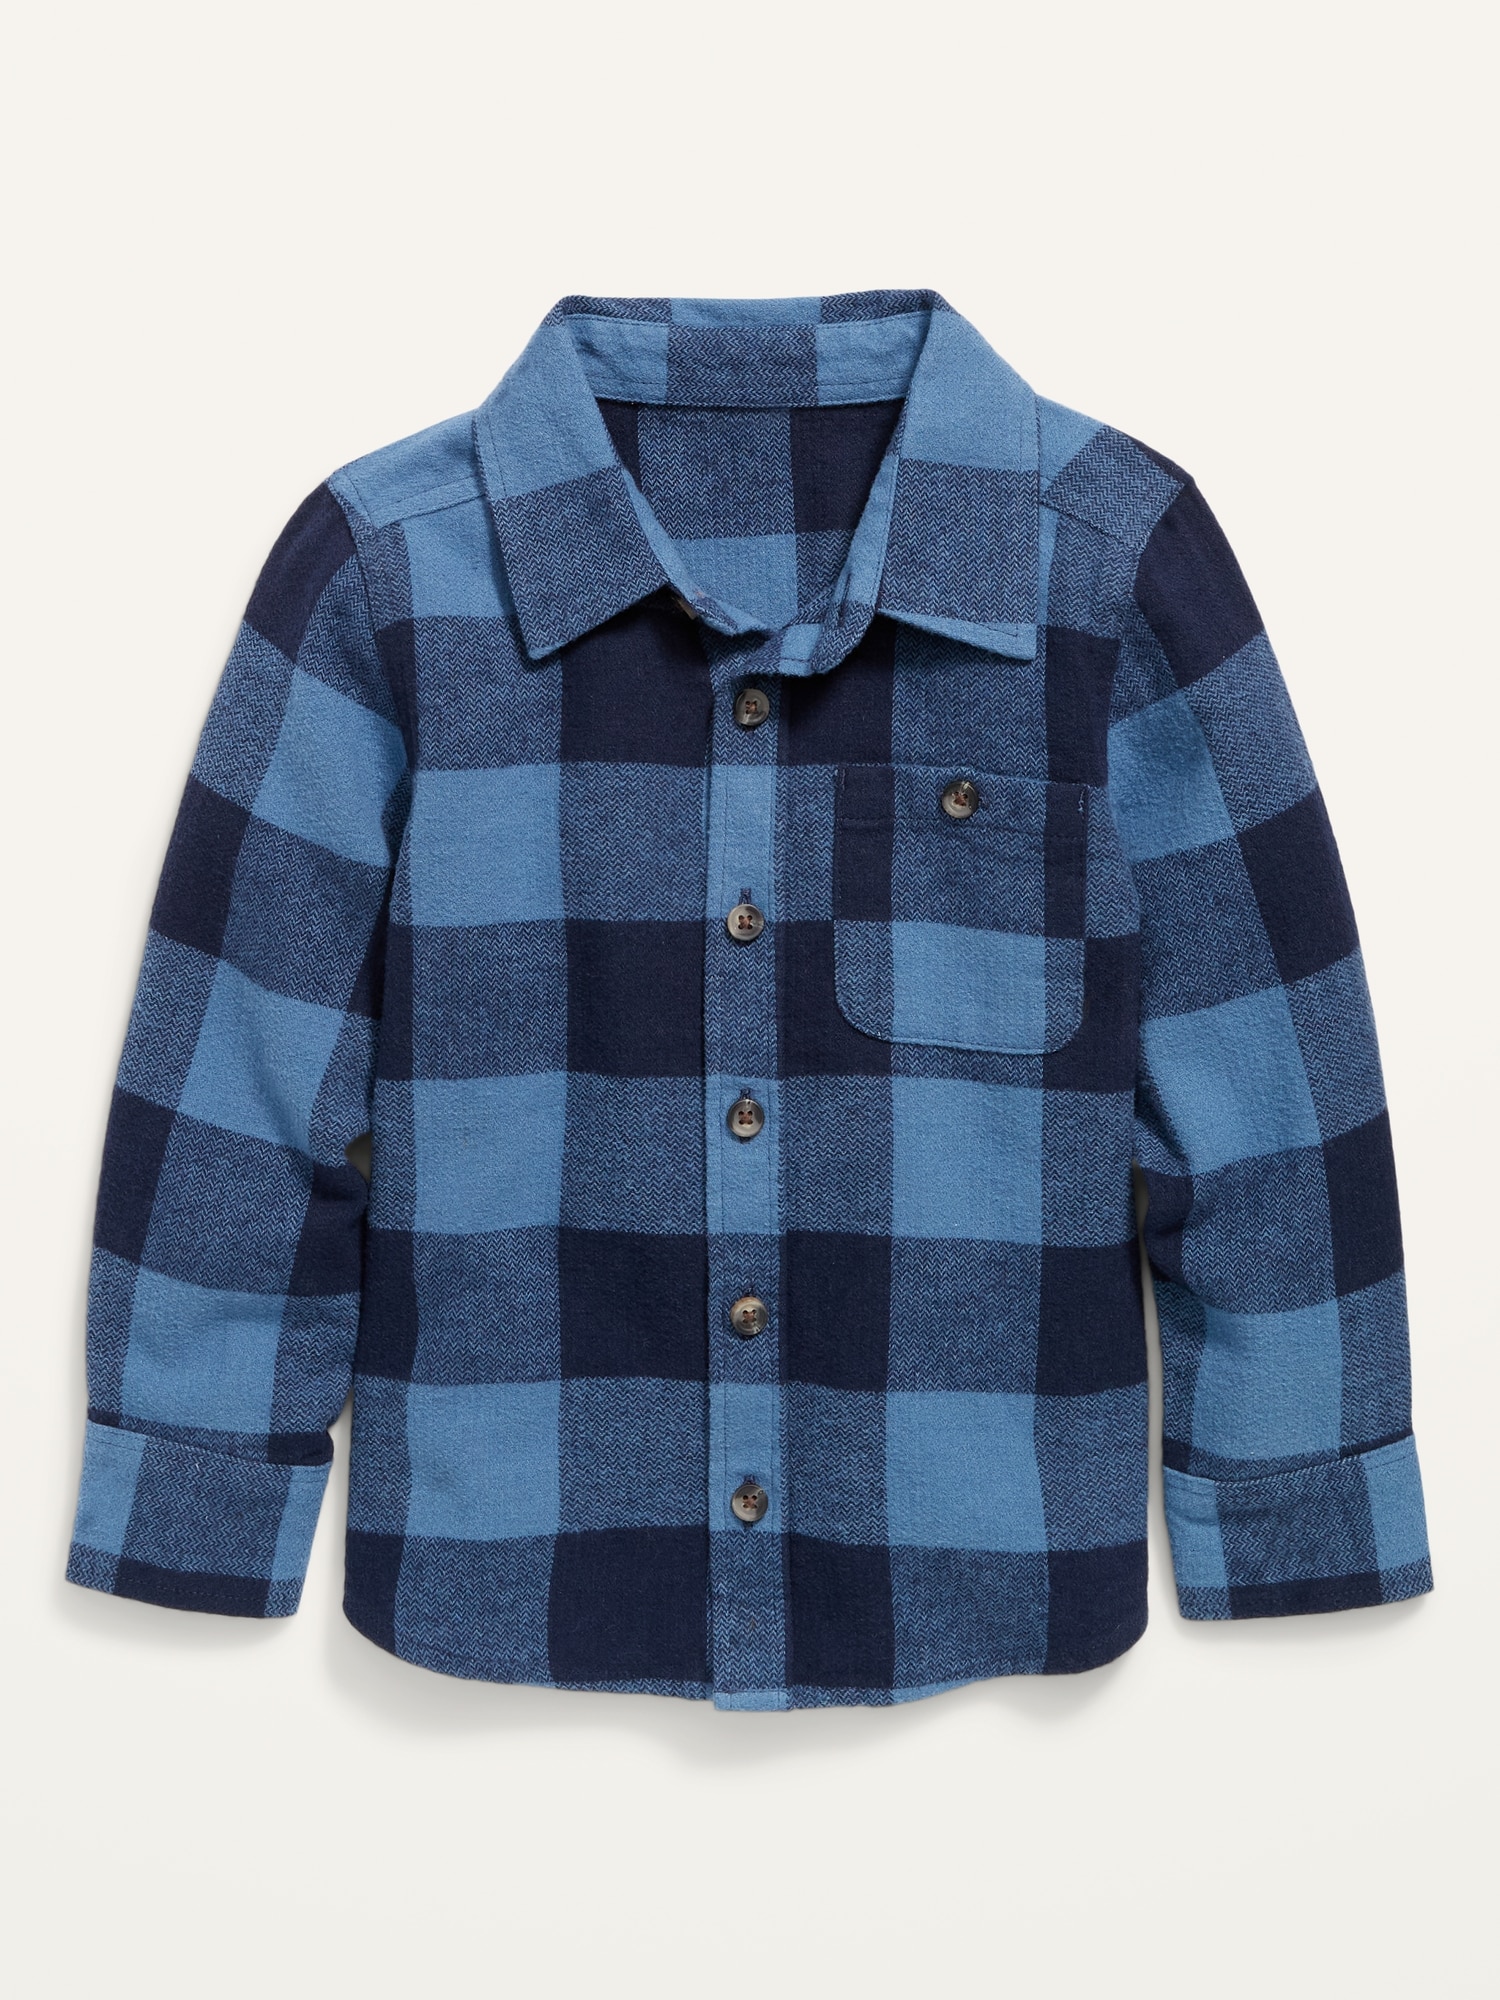 Kids Boys Long Sleeve Button Down Plaid Flannel Shirts with Pocket 